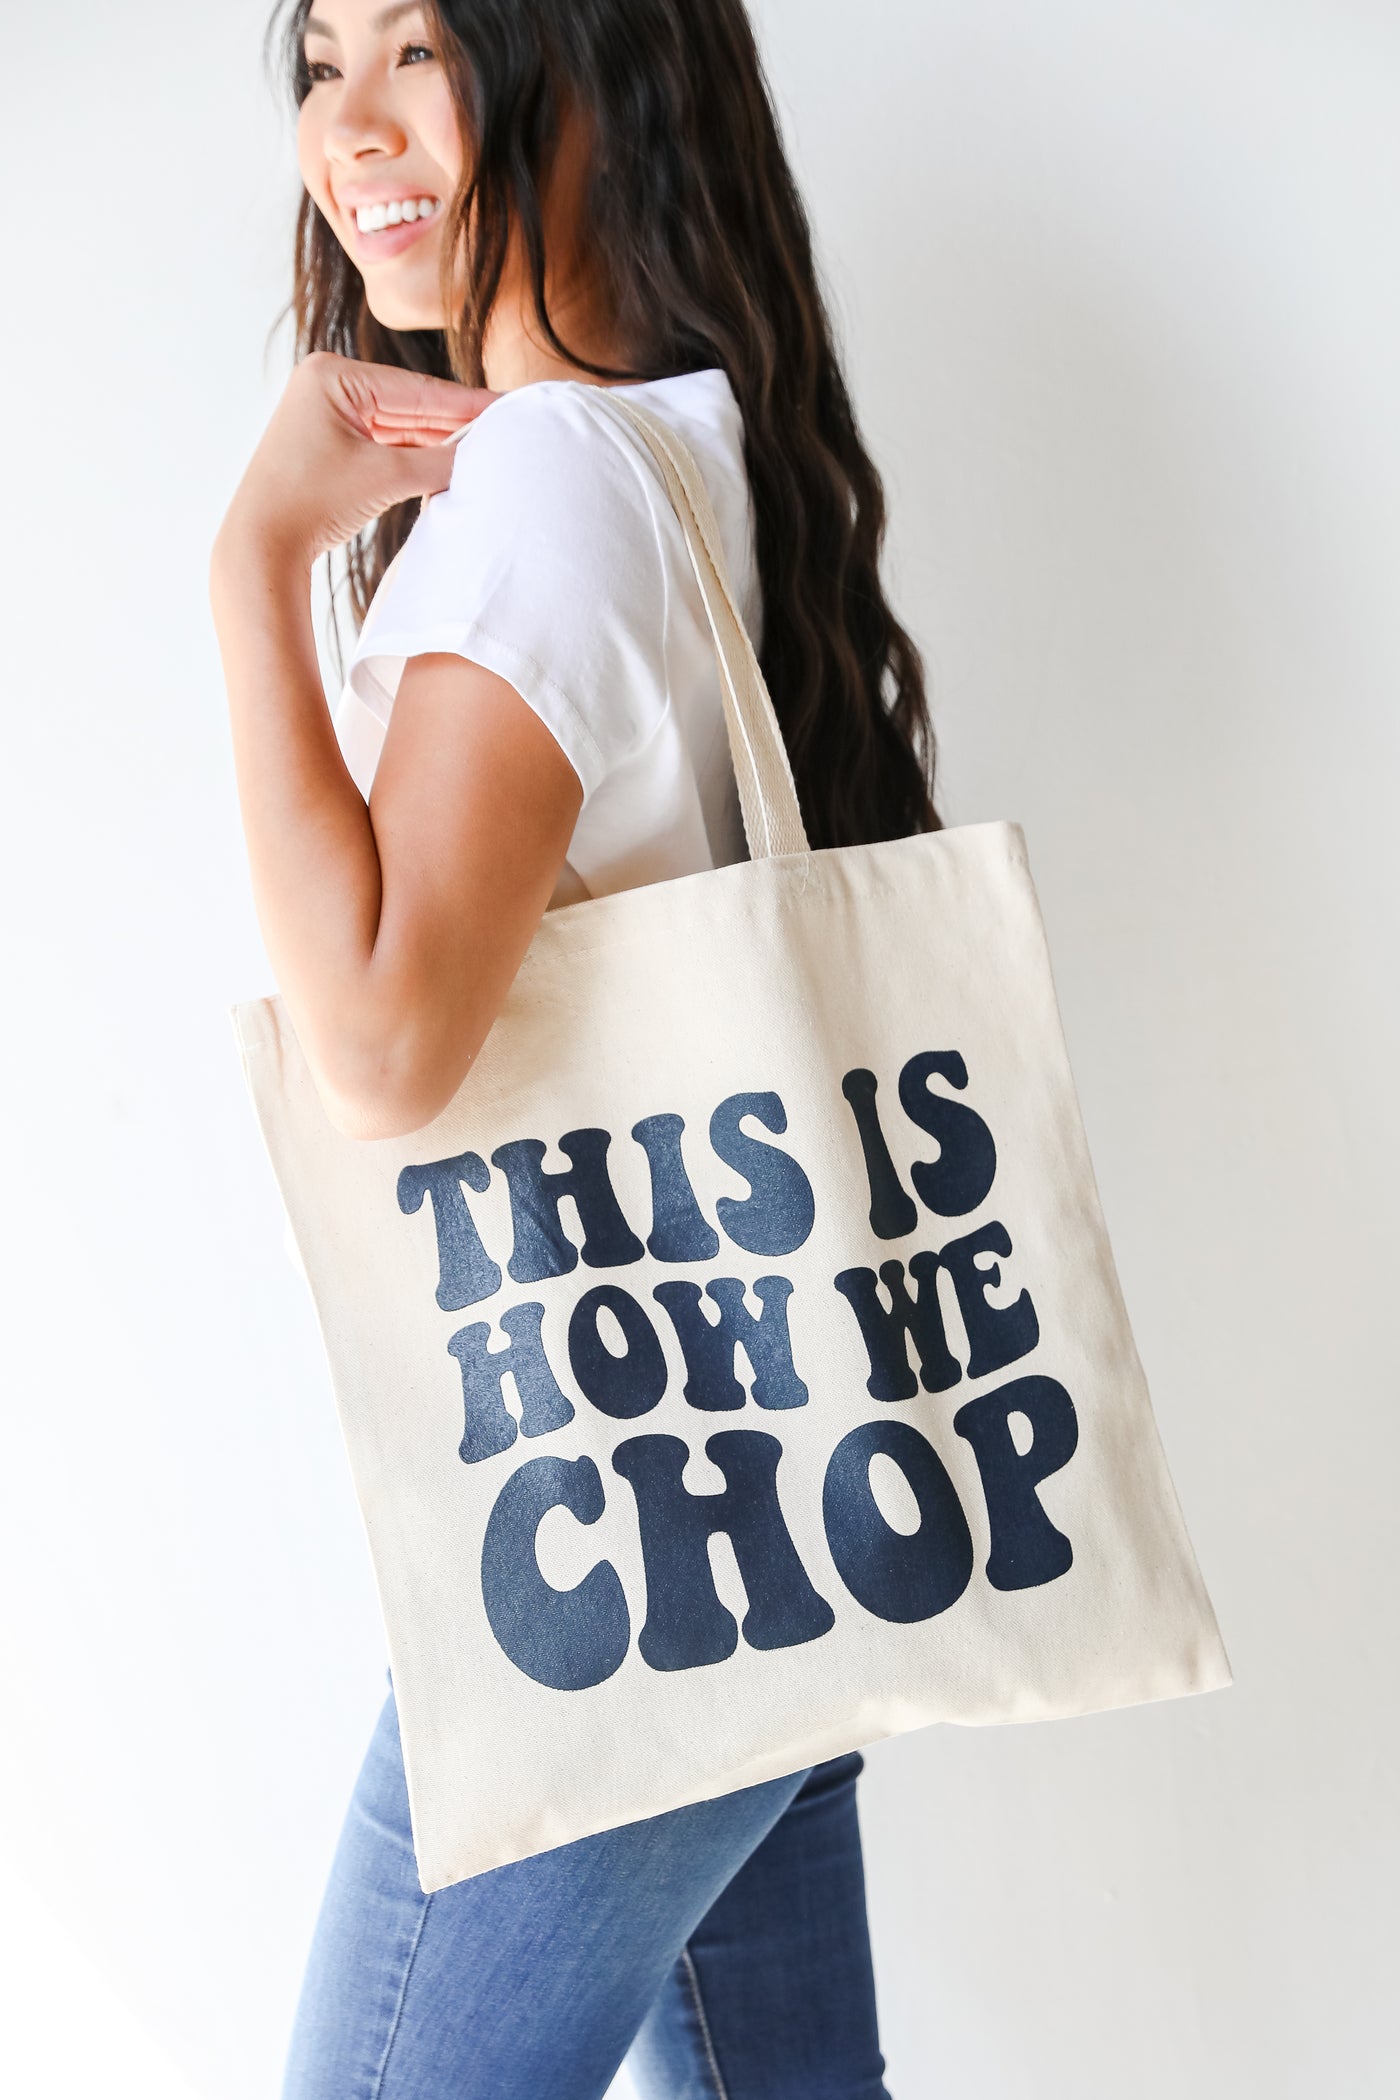 This Is How We Chop Tote Bag on model